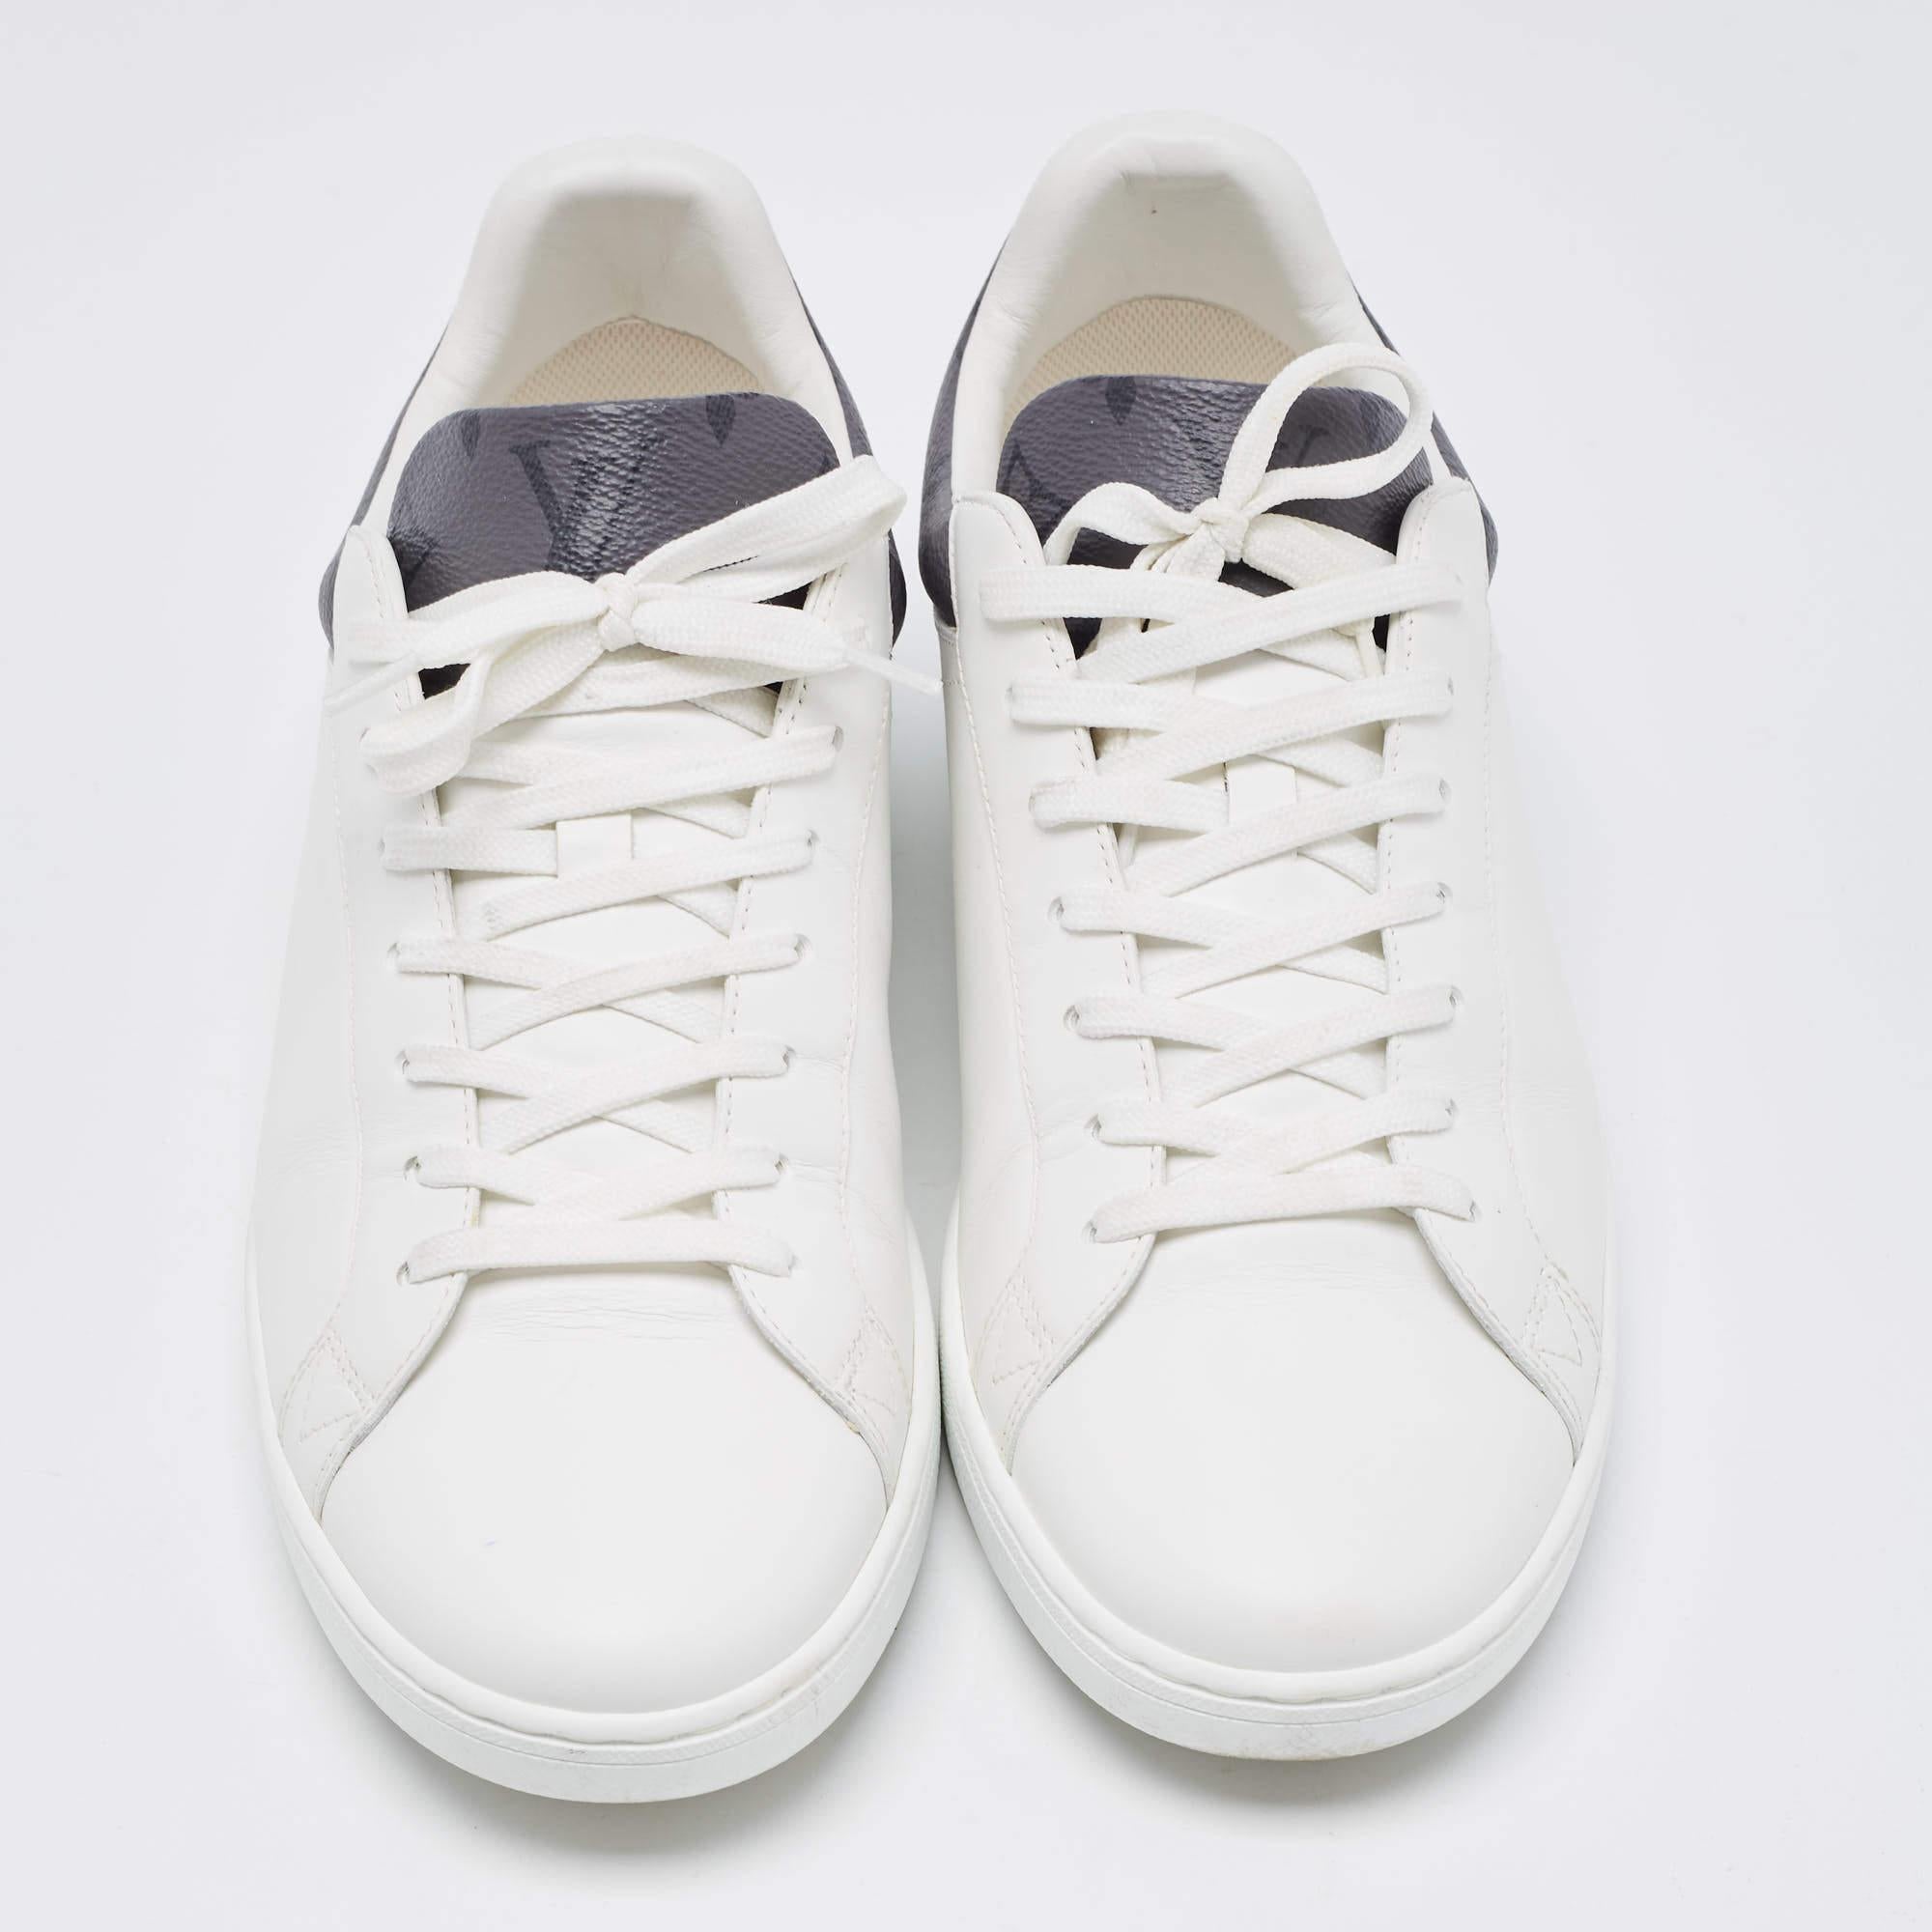 Upgrade your style with these LV white sneakers. Meticulously designed for fashion and comfort, they're the ideal choice for a trendy and comfortable stride.

